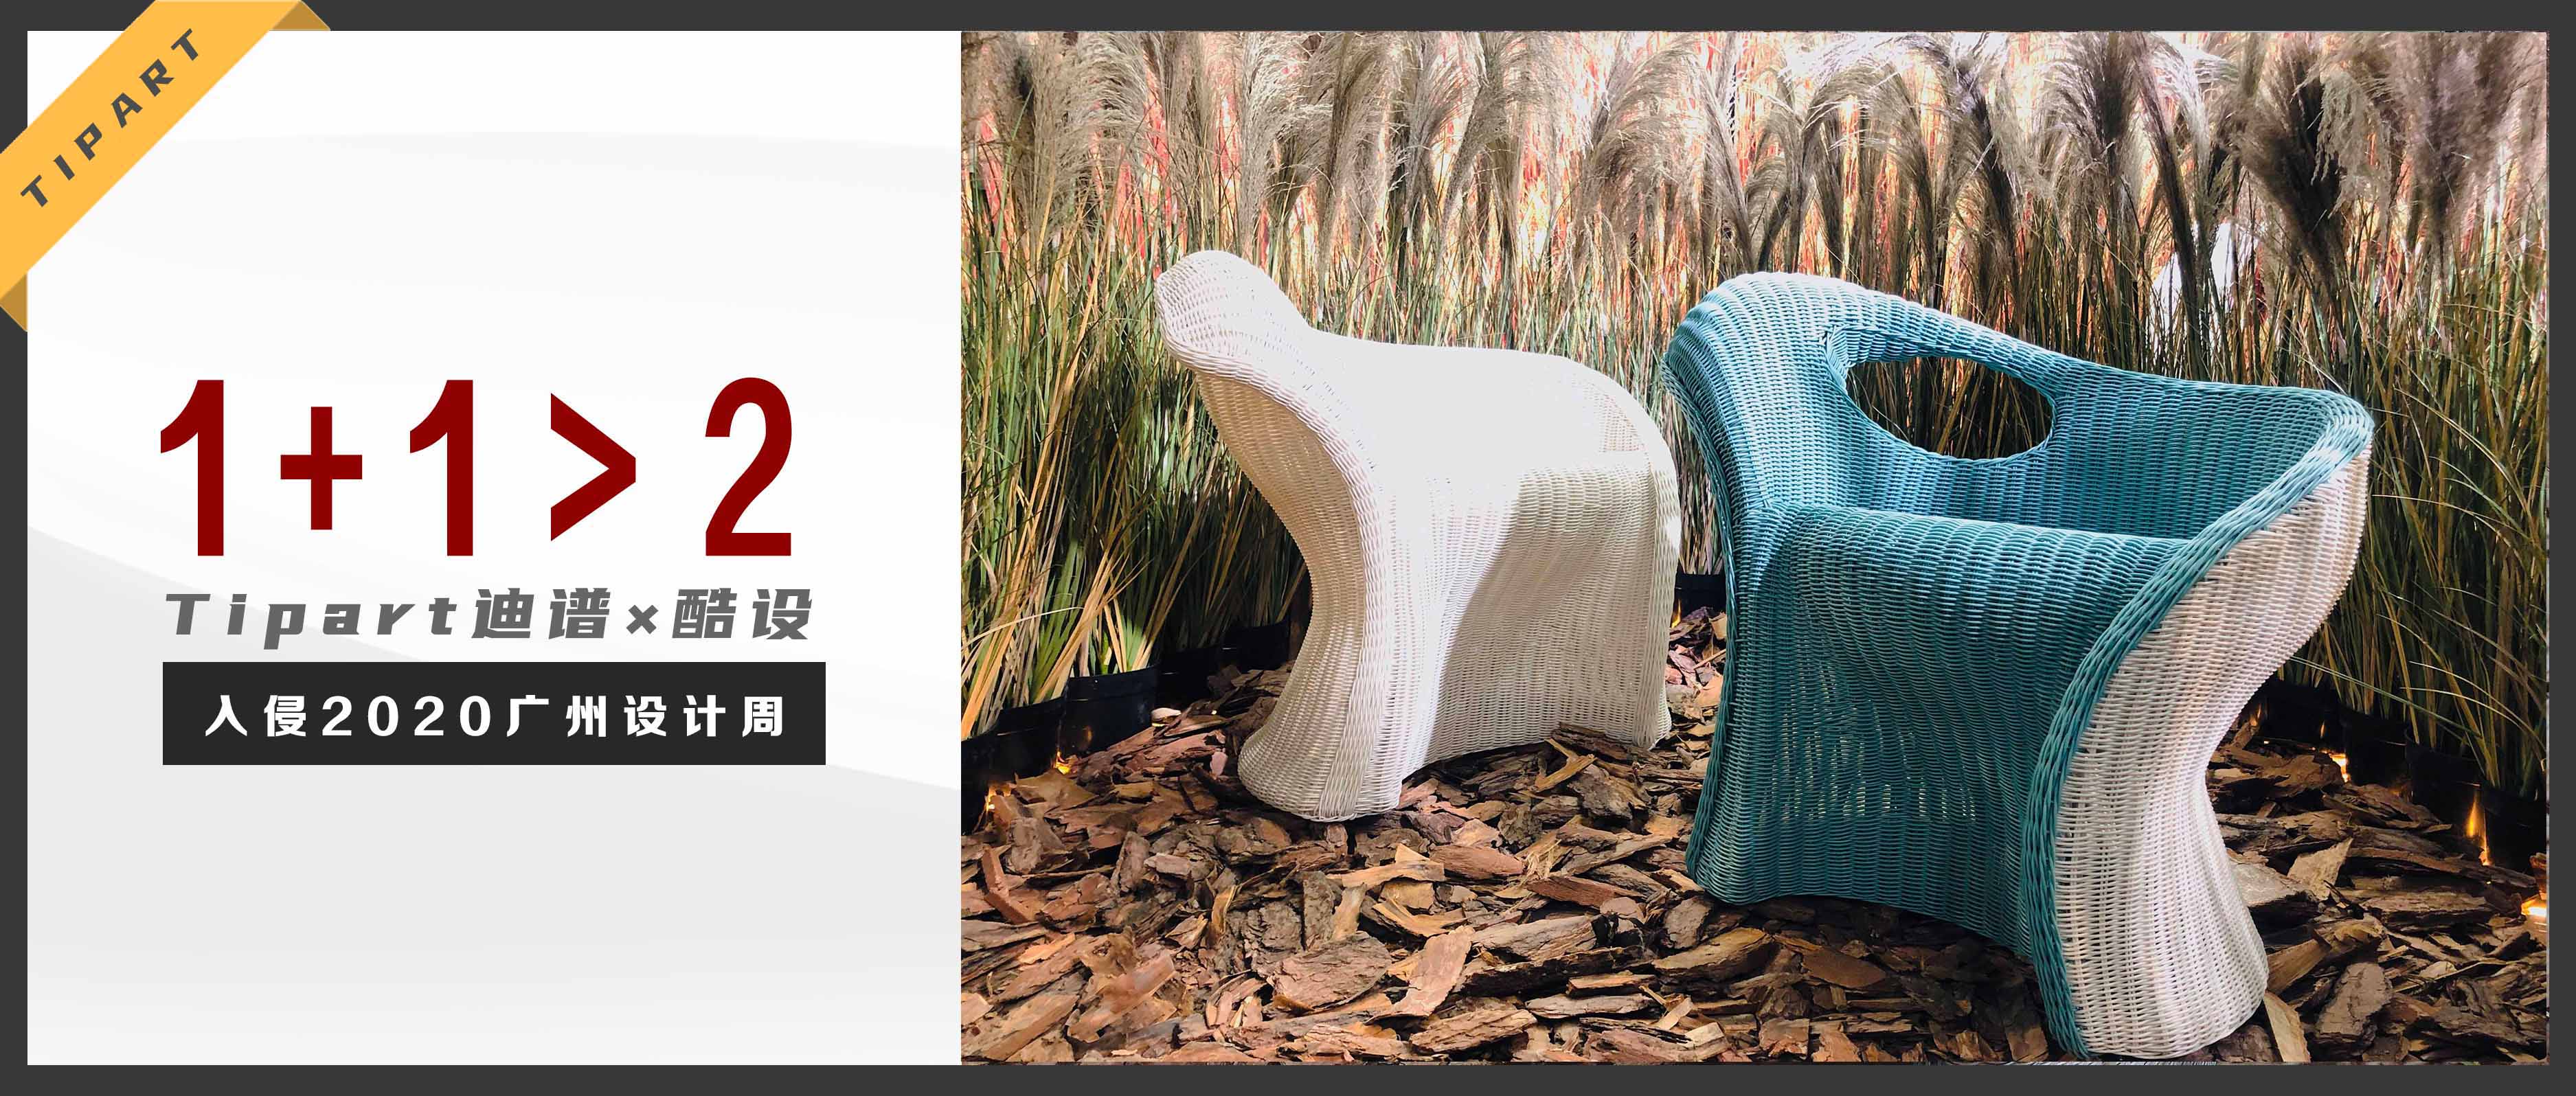 Tipart also participates in joint activities? Tipart X Couture’s collaboration furniture has unveile